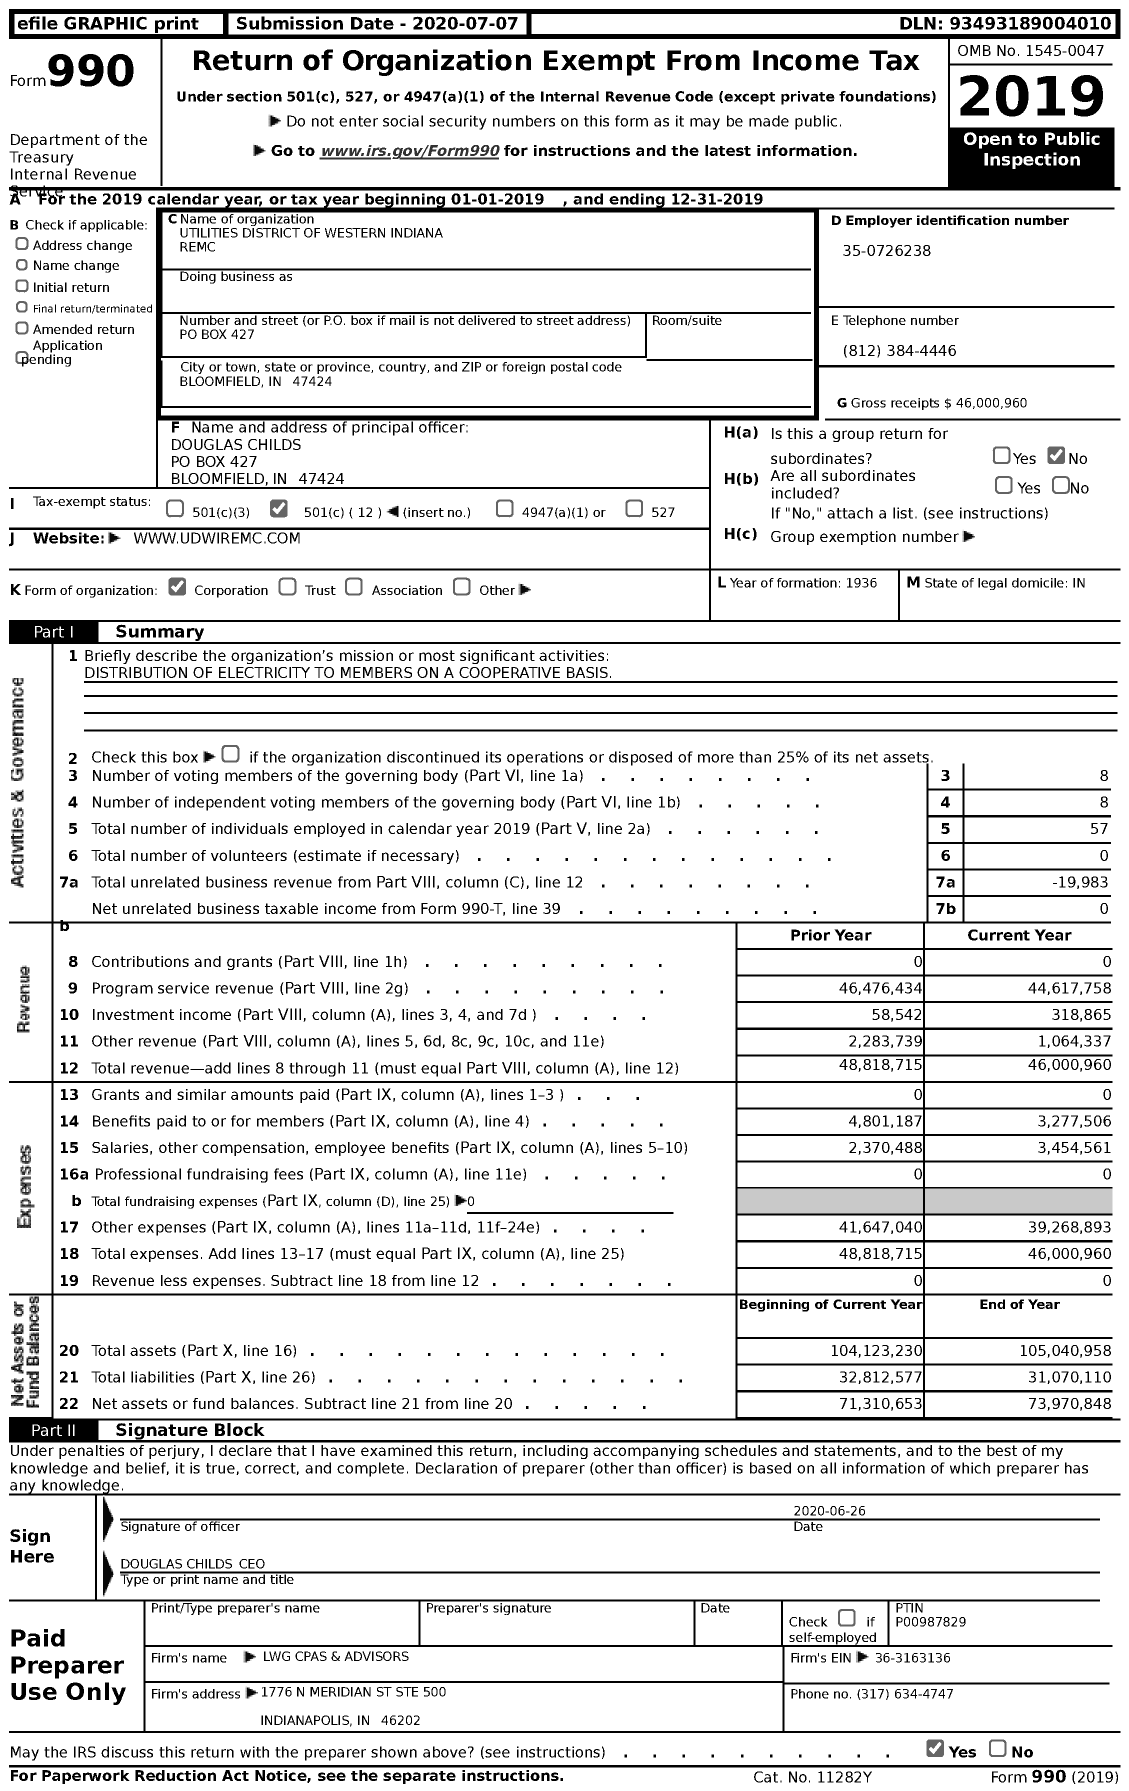 Image of first page of 2019 Form 990 for Utilities District of Western Indiana Remc